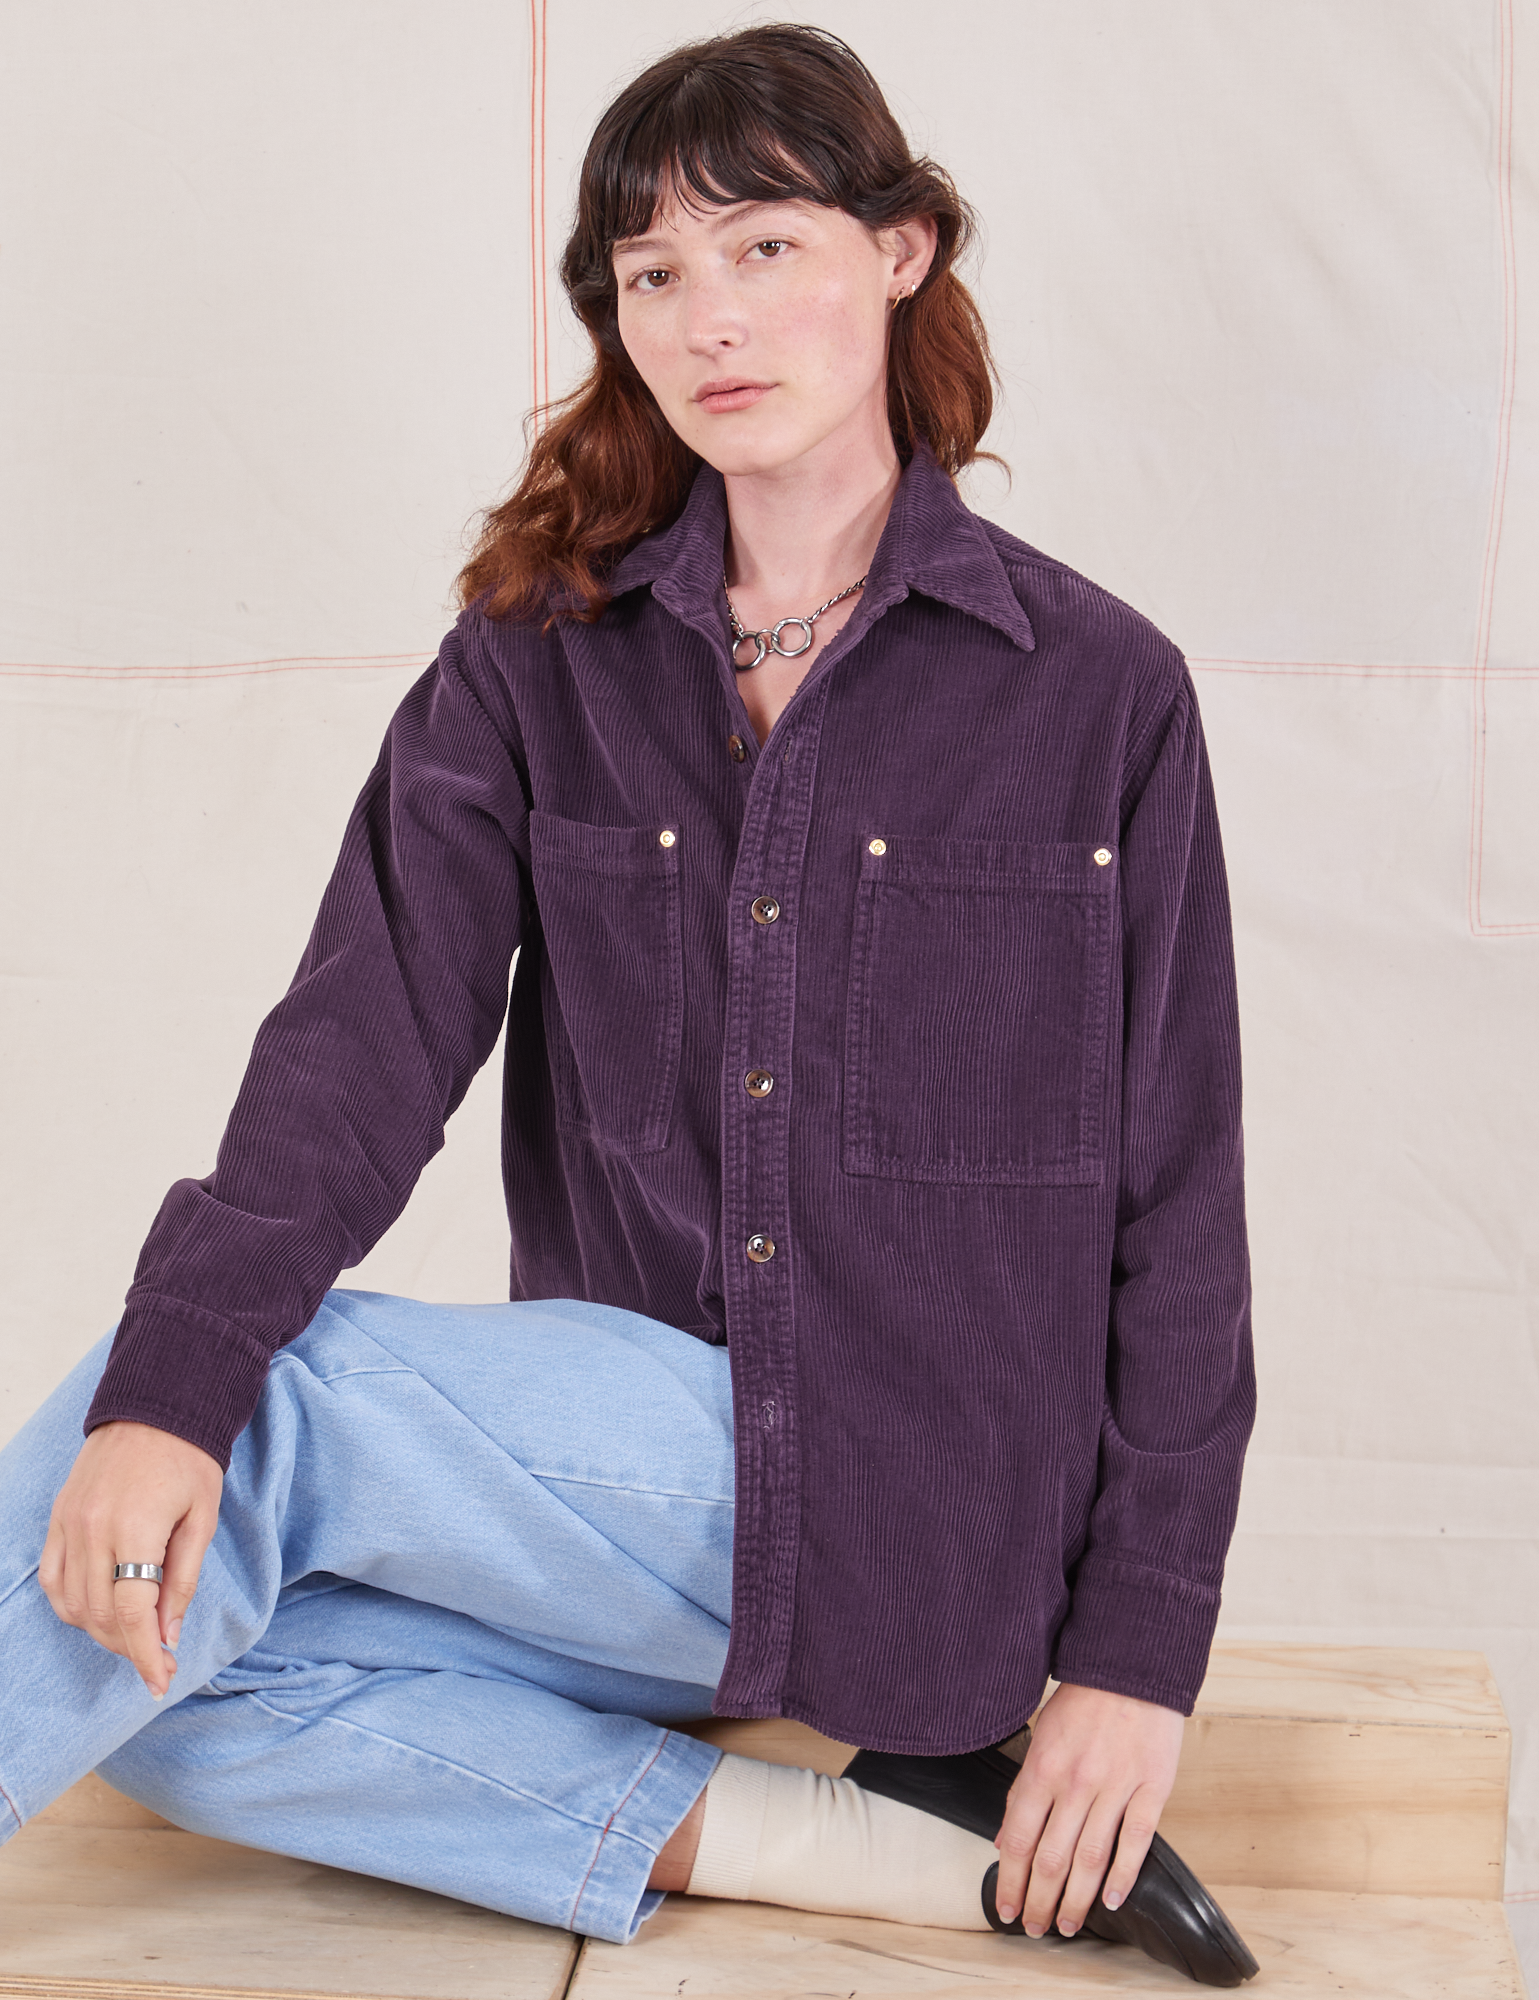 Alex is wearing a buttoned up Corduroy Overshirt in Nebula Purple